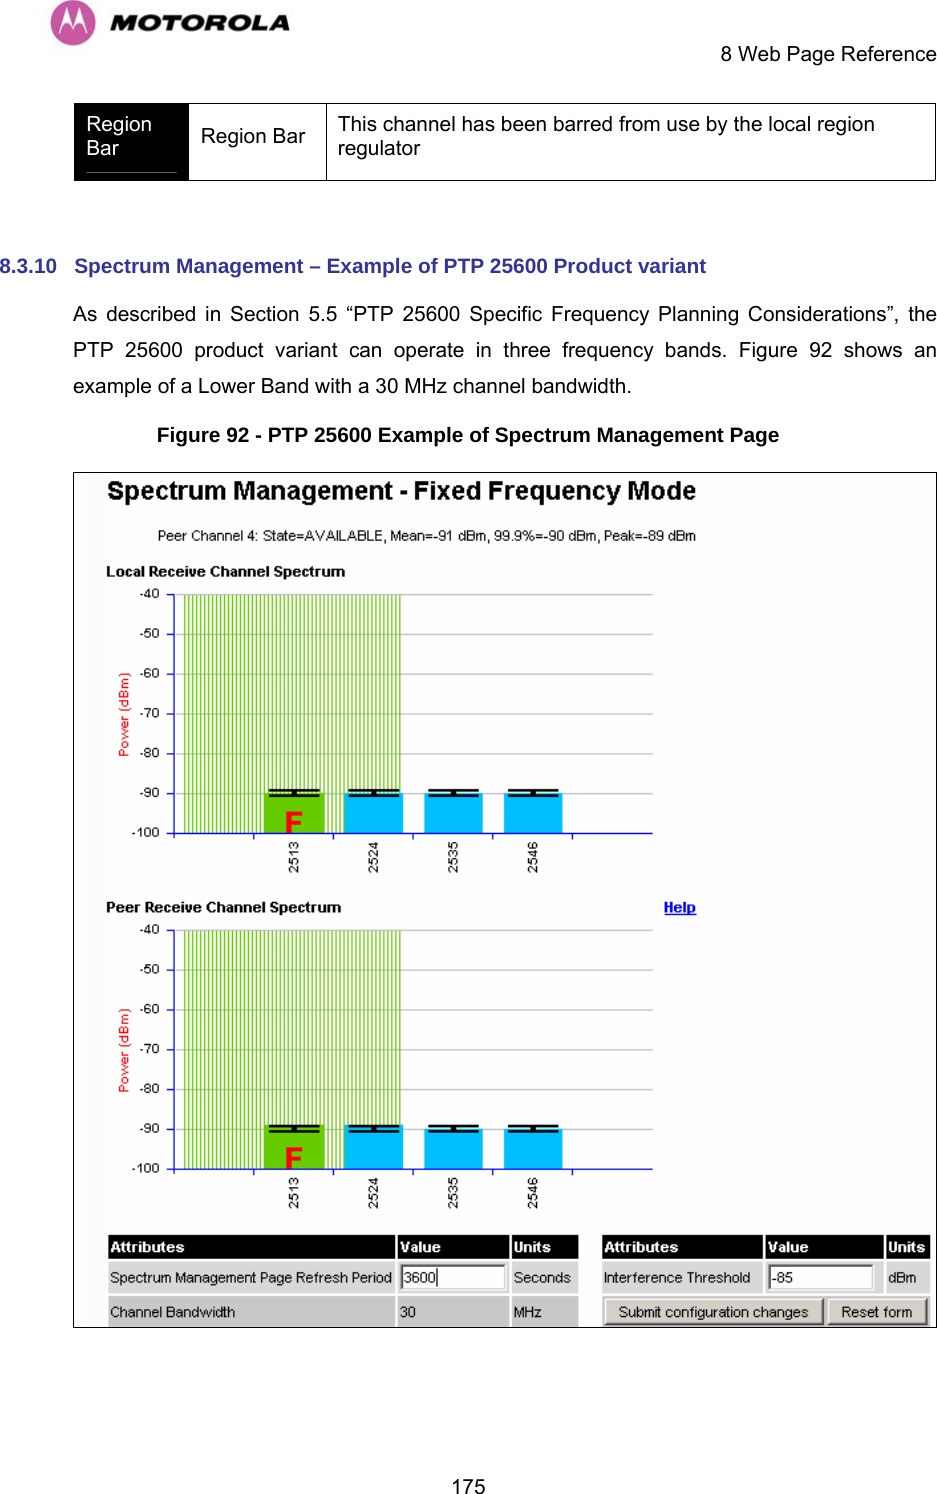     8 Web Page Reference  175Region Bar  Region Bar  This channel has been barred from use by the local region regulator  8.3.10  Spectrum Management – Example of PTP 25600 Product variant As described in Section 5.5 “PTP 25600 Specific Frequency Planning Considerations”, the PTP 25600 product variant can operate in three frequency bands. Figure 92 shows an example of a Lower Band with a 30 MHz channel bandwidth. Figure 92 - PTP 25600 Example of Spectrum Management Page   